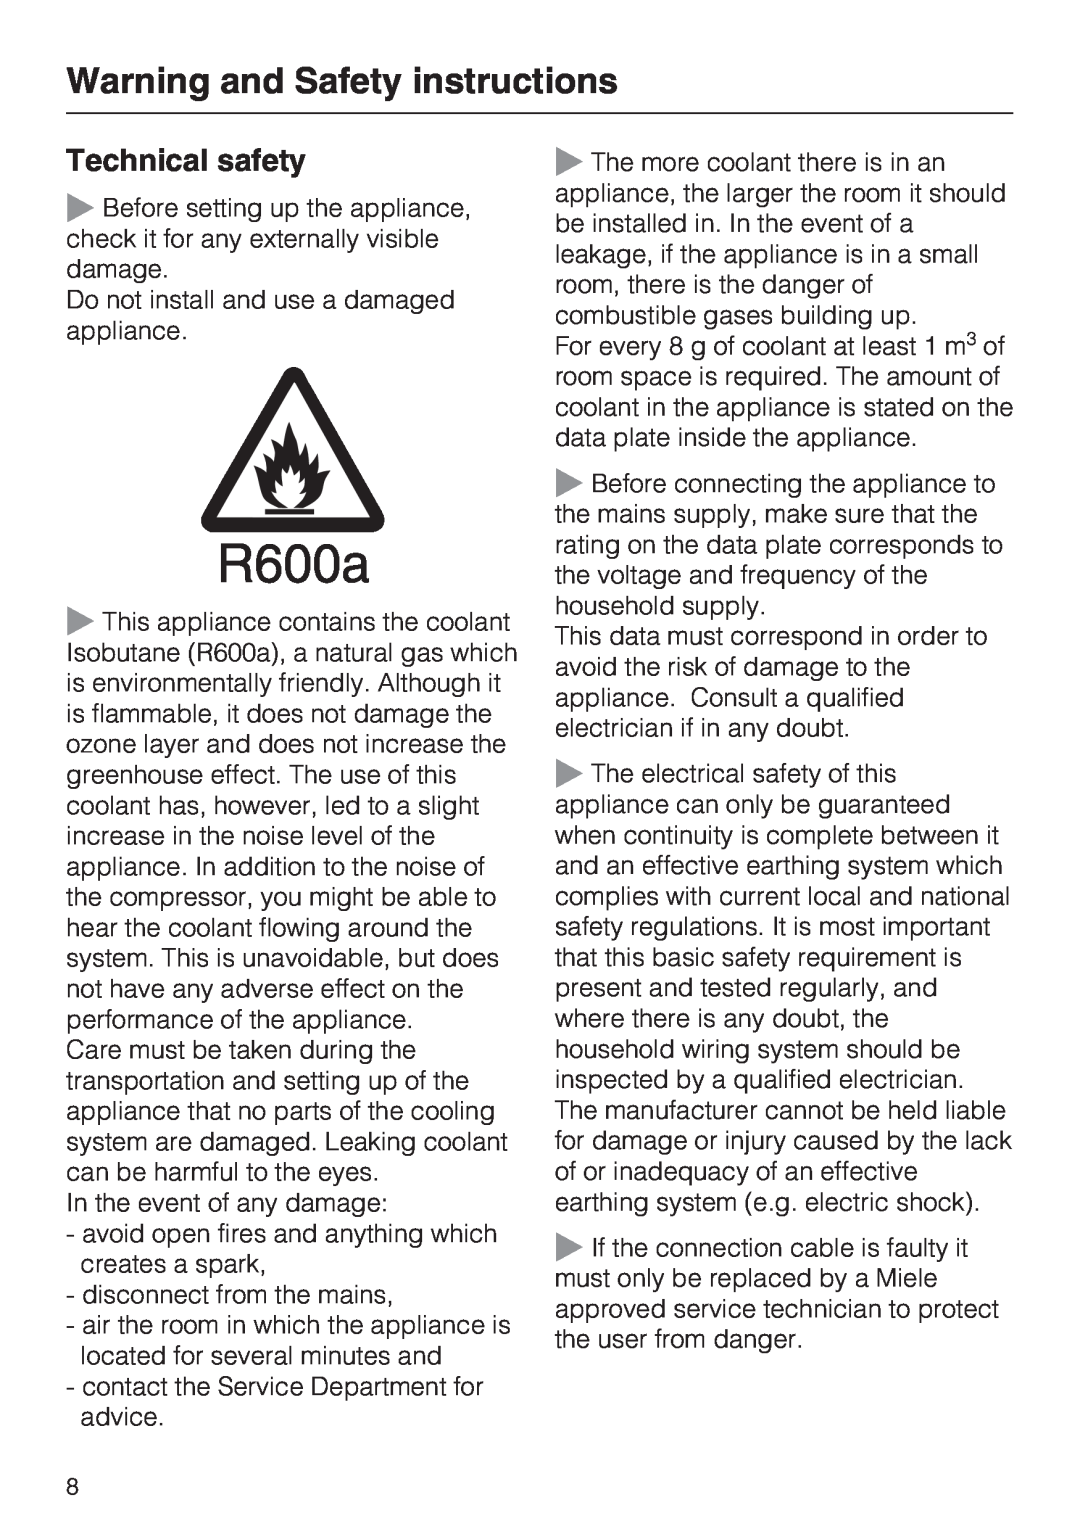 Miele K9752, K9552 installation instructions Technical safety, Warning and Safety instructions 